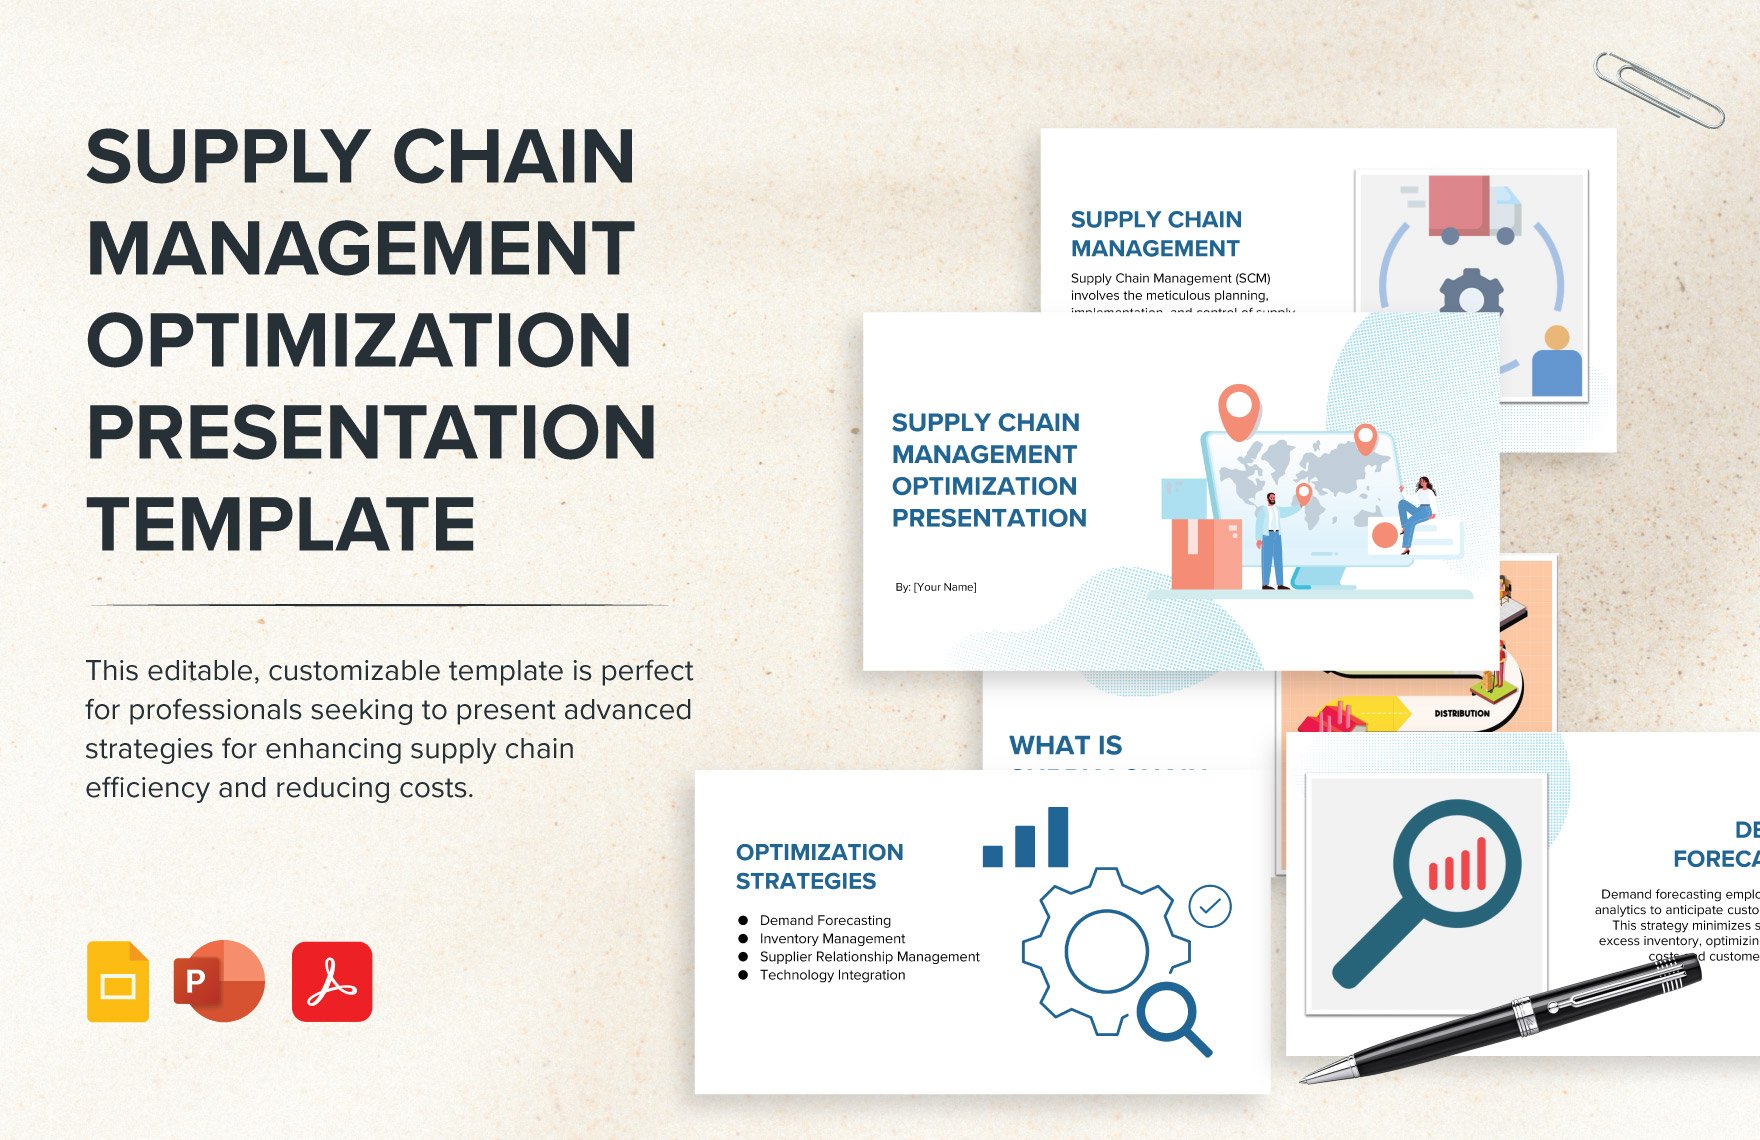 Free Supply Chain Management Optimization Presentation Template in PDF, PowerPoint